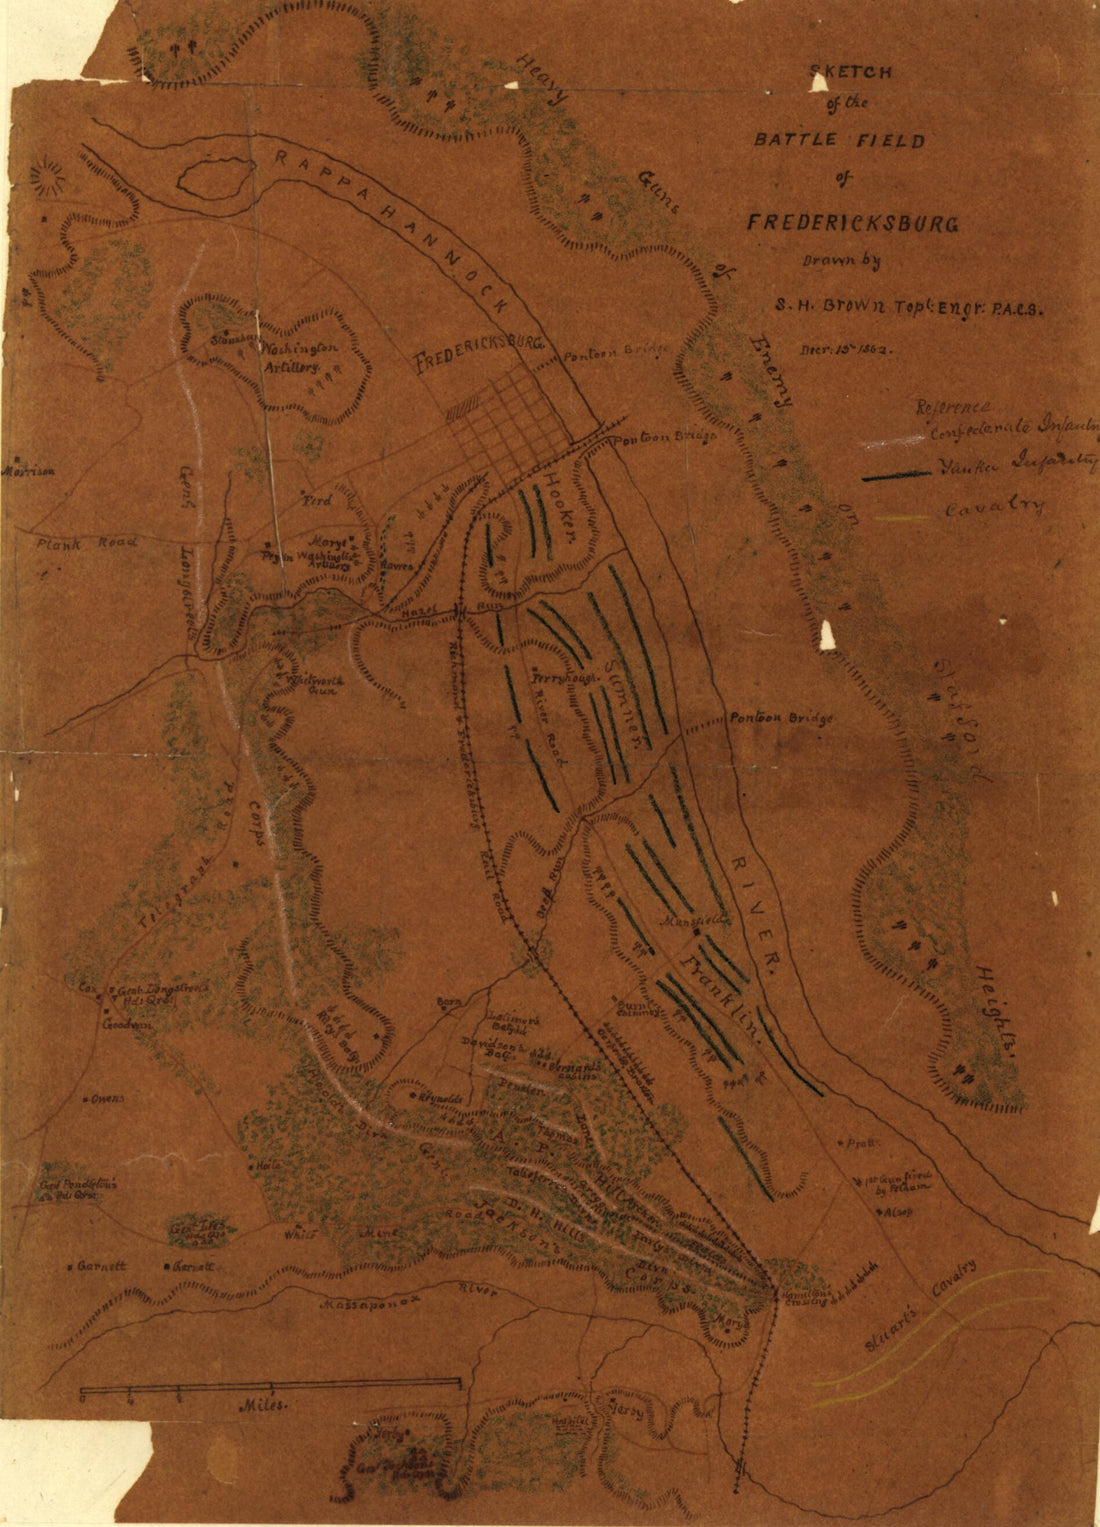 This old map of Sketch of the Battle Field of Fredericksburg from 1862 was created by Samuel Howell Brown in 1862